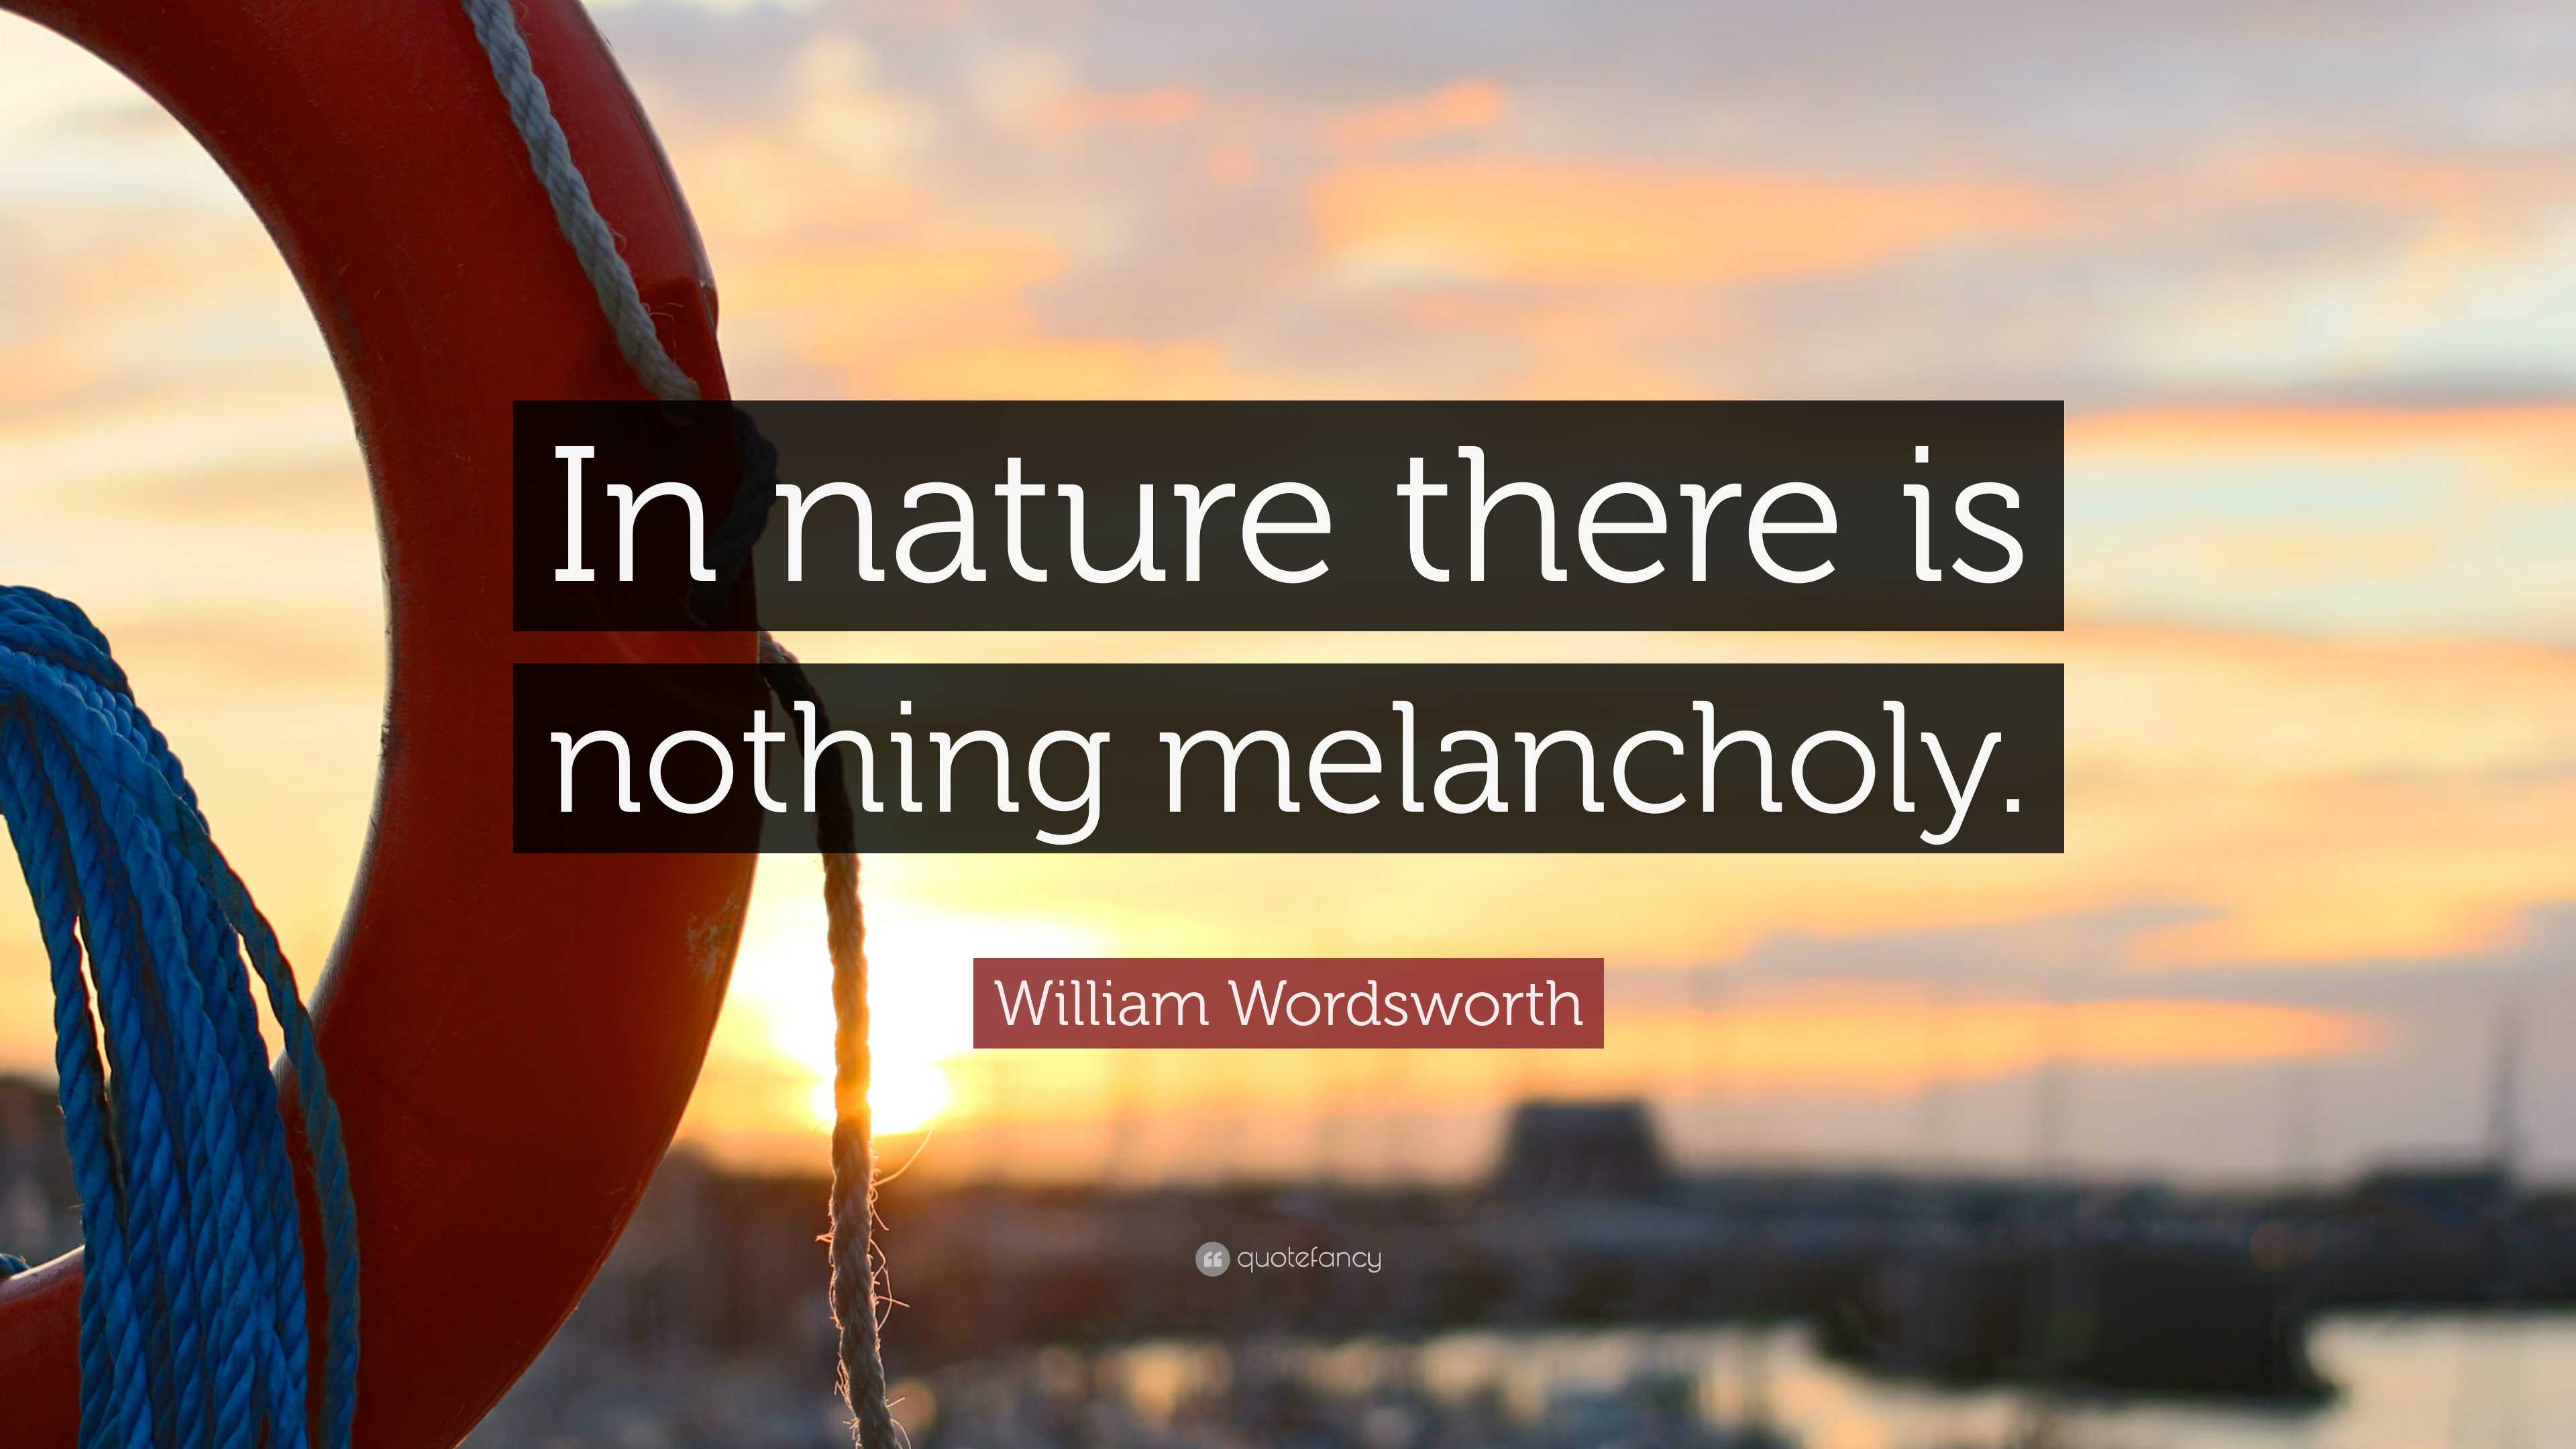 William Wordsworth Quote “in Nature There Is Nothing Melancholy” 9722